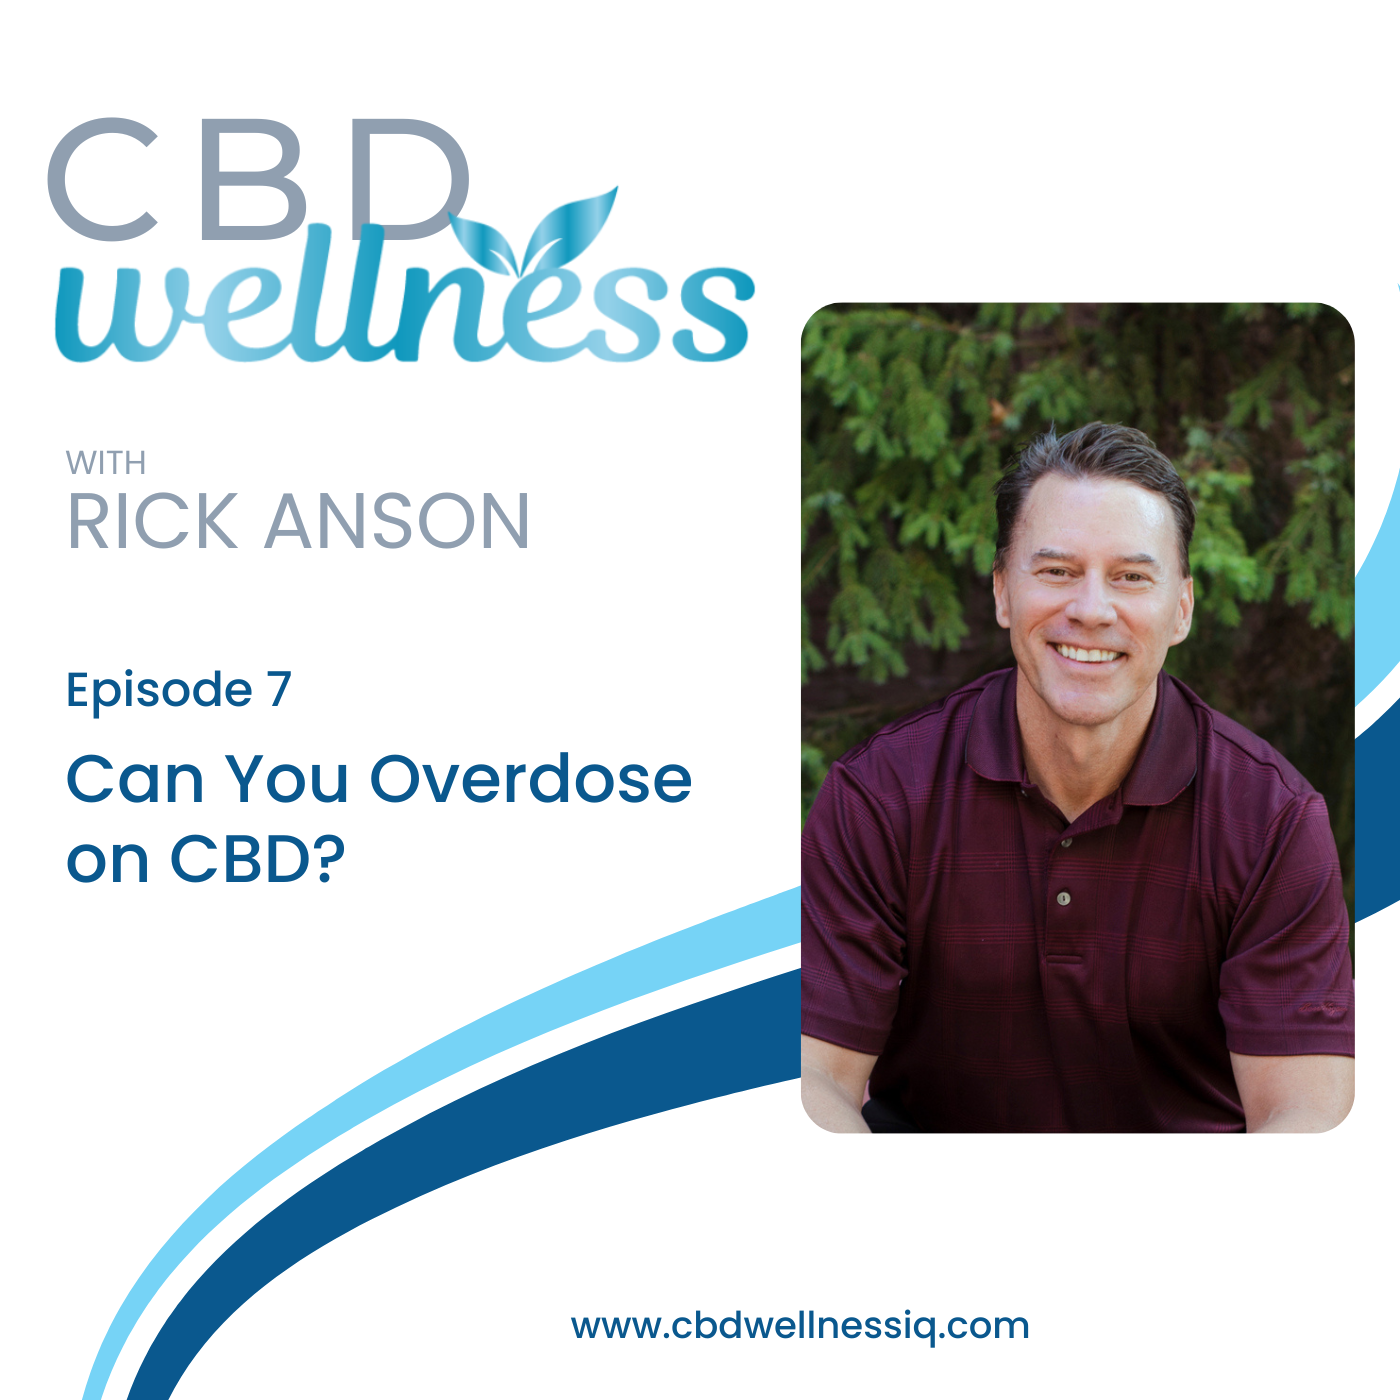 Can You Overdose on CBD?